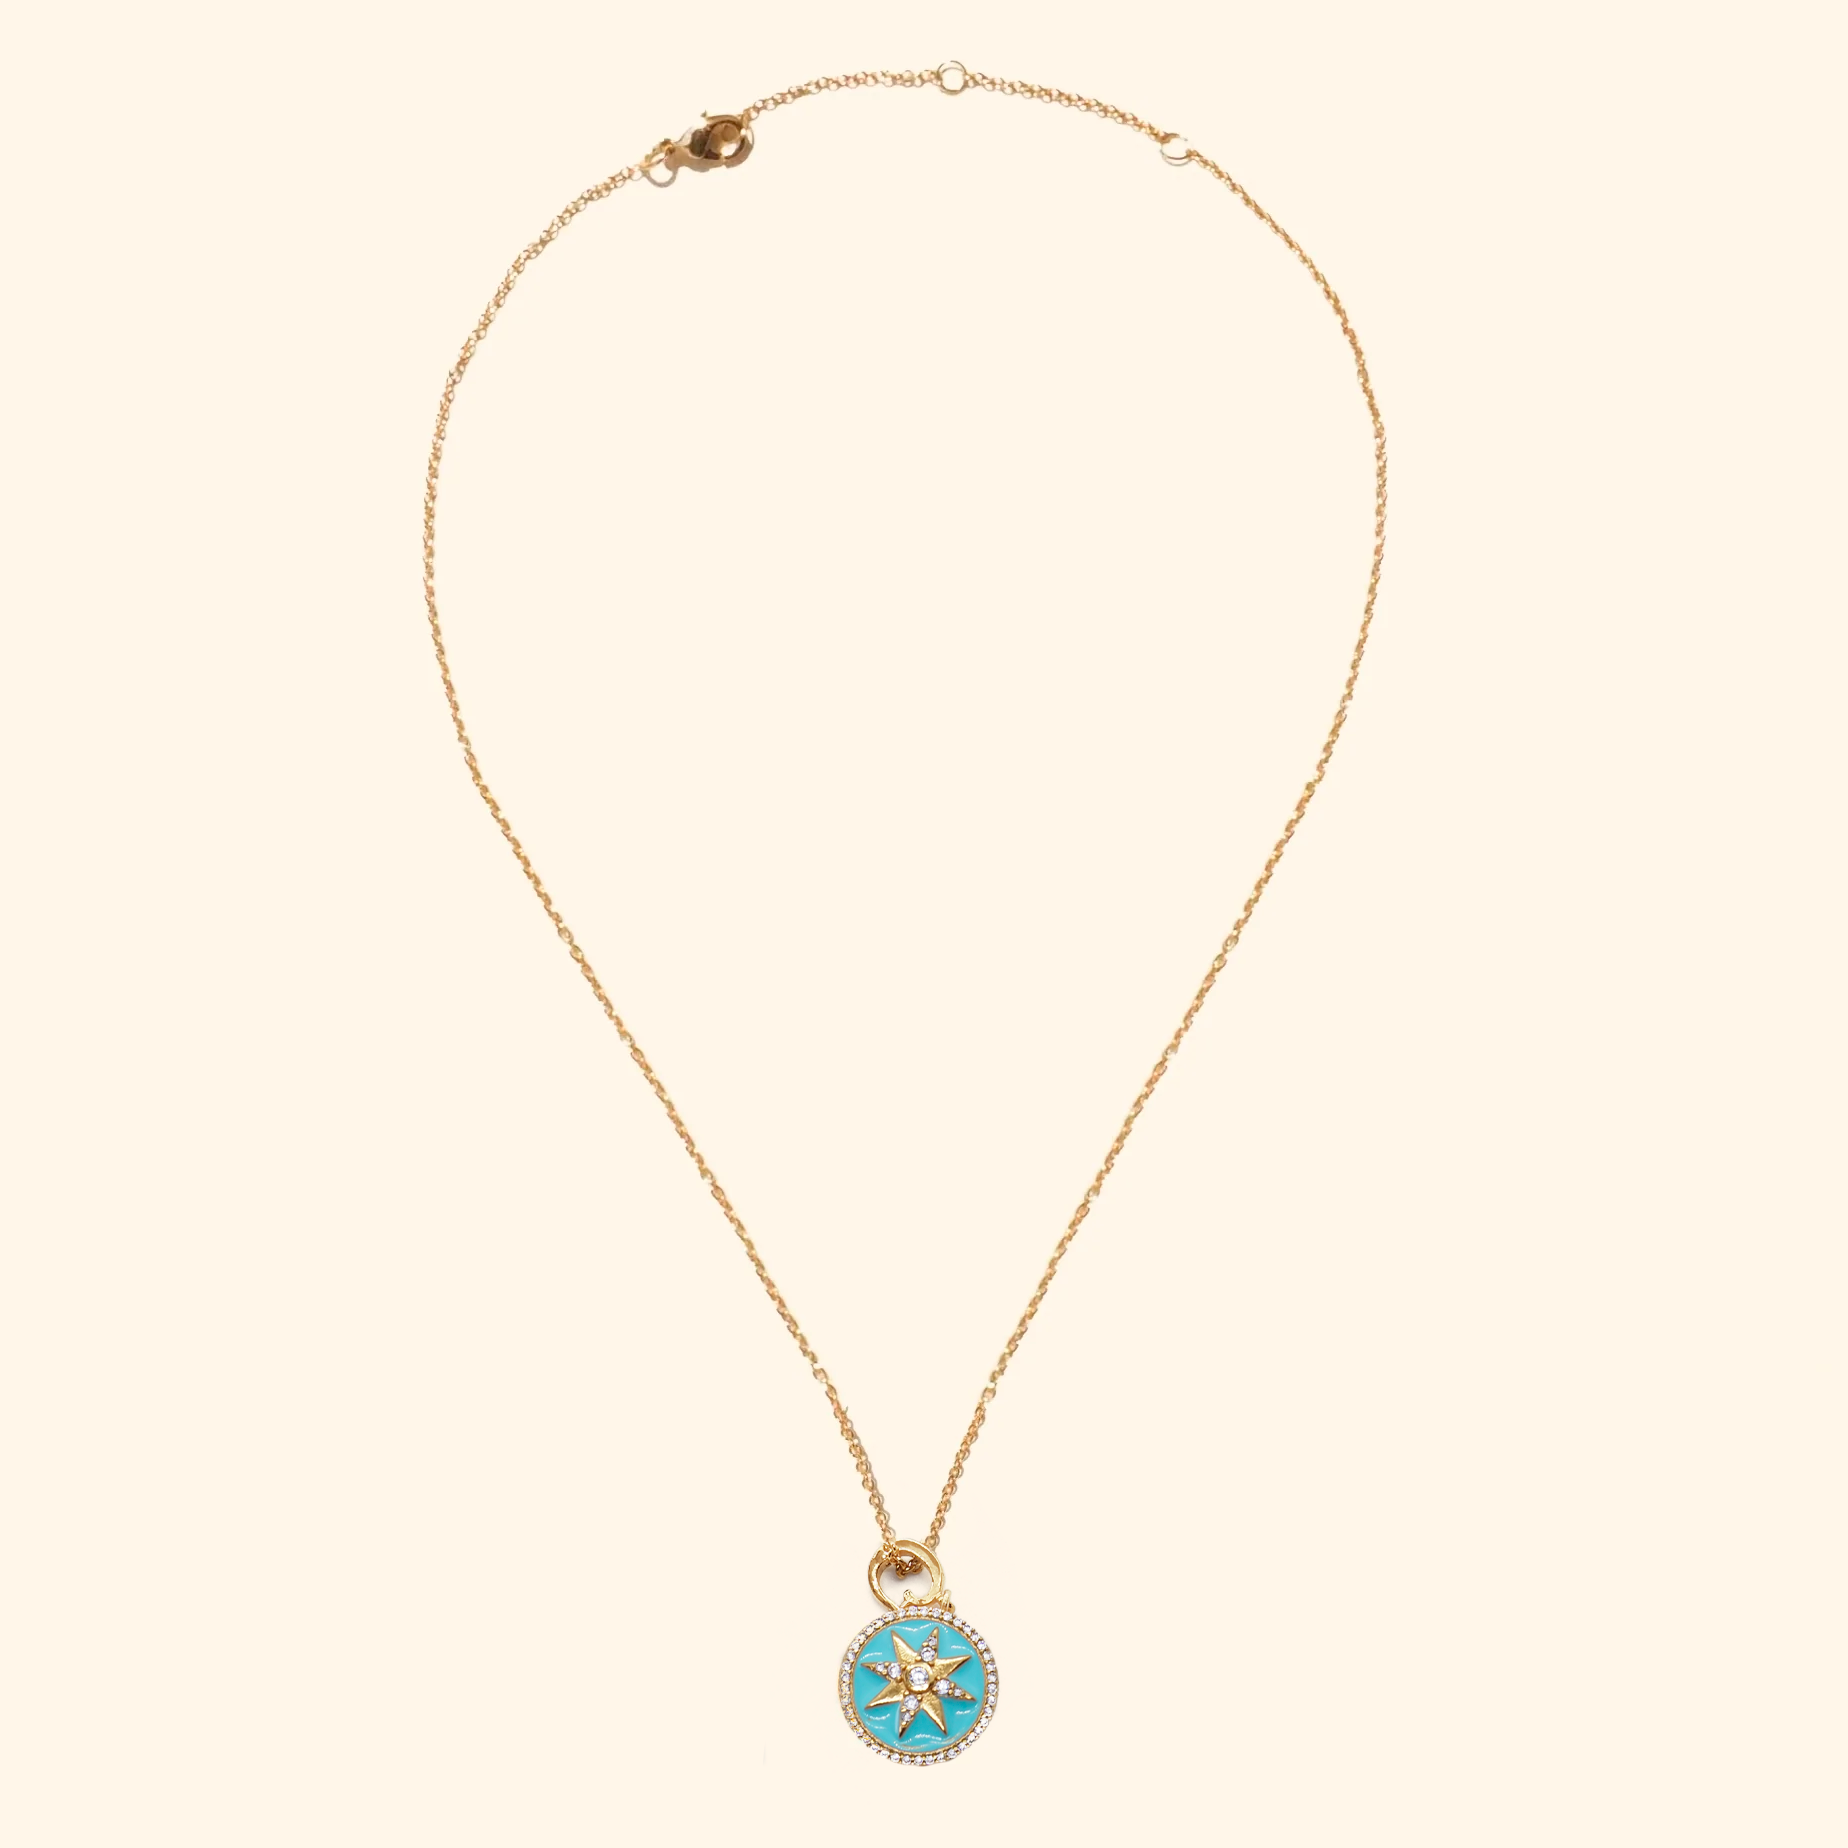 Blue North star necklace